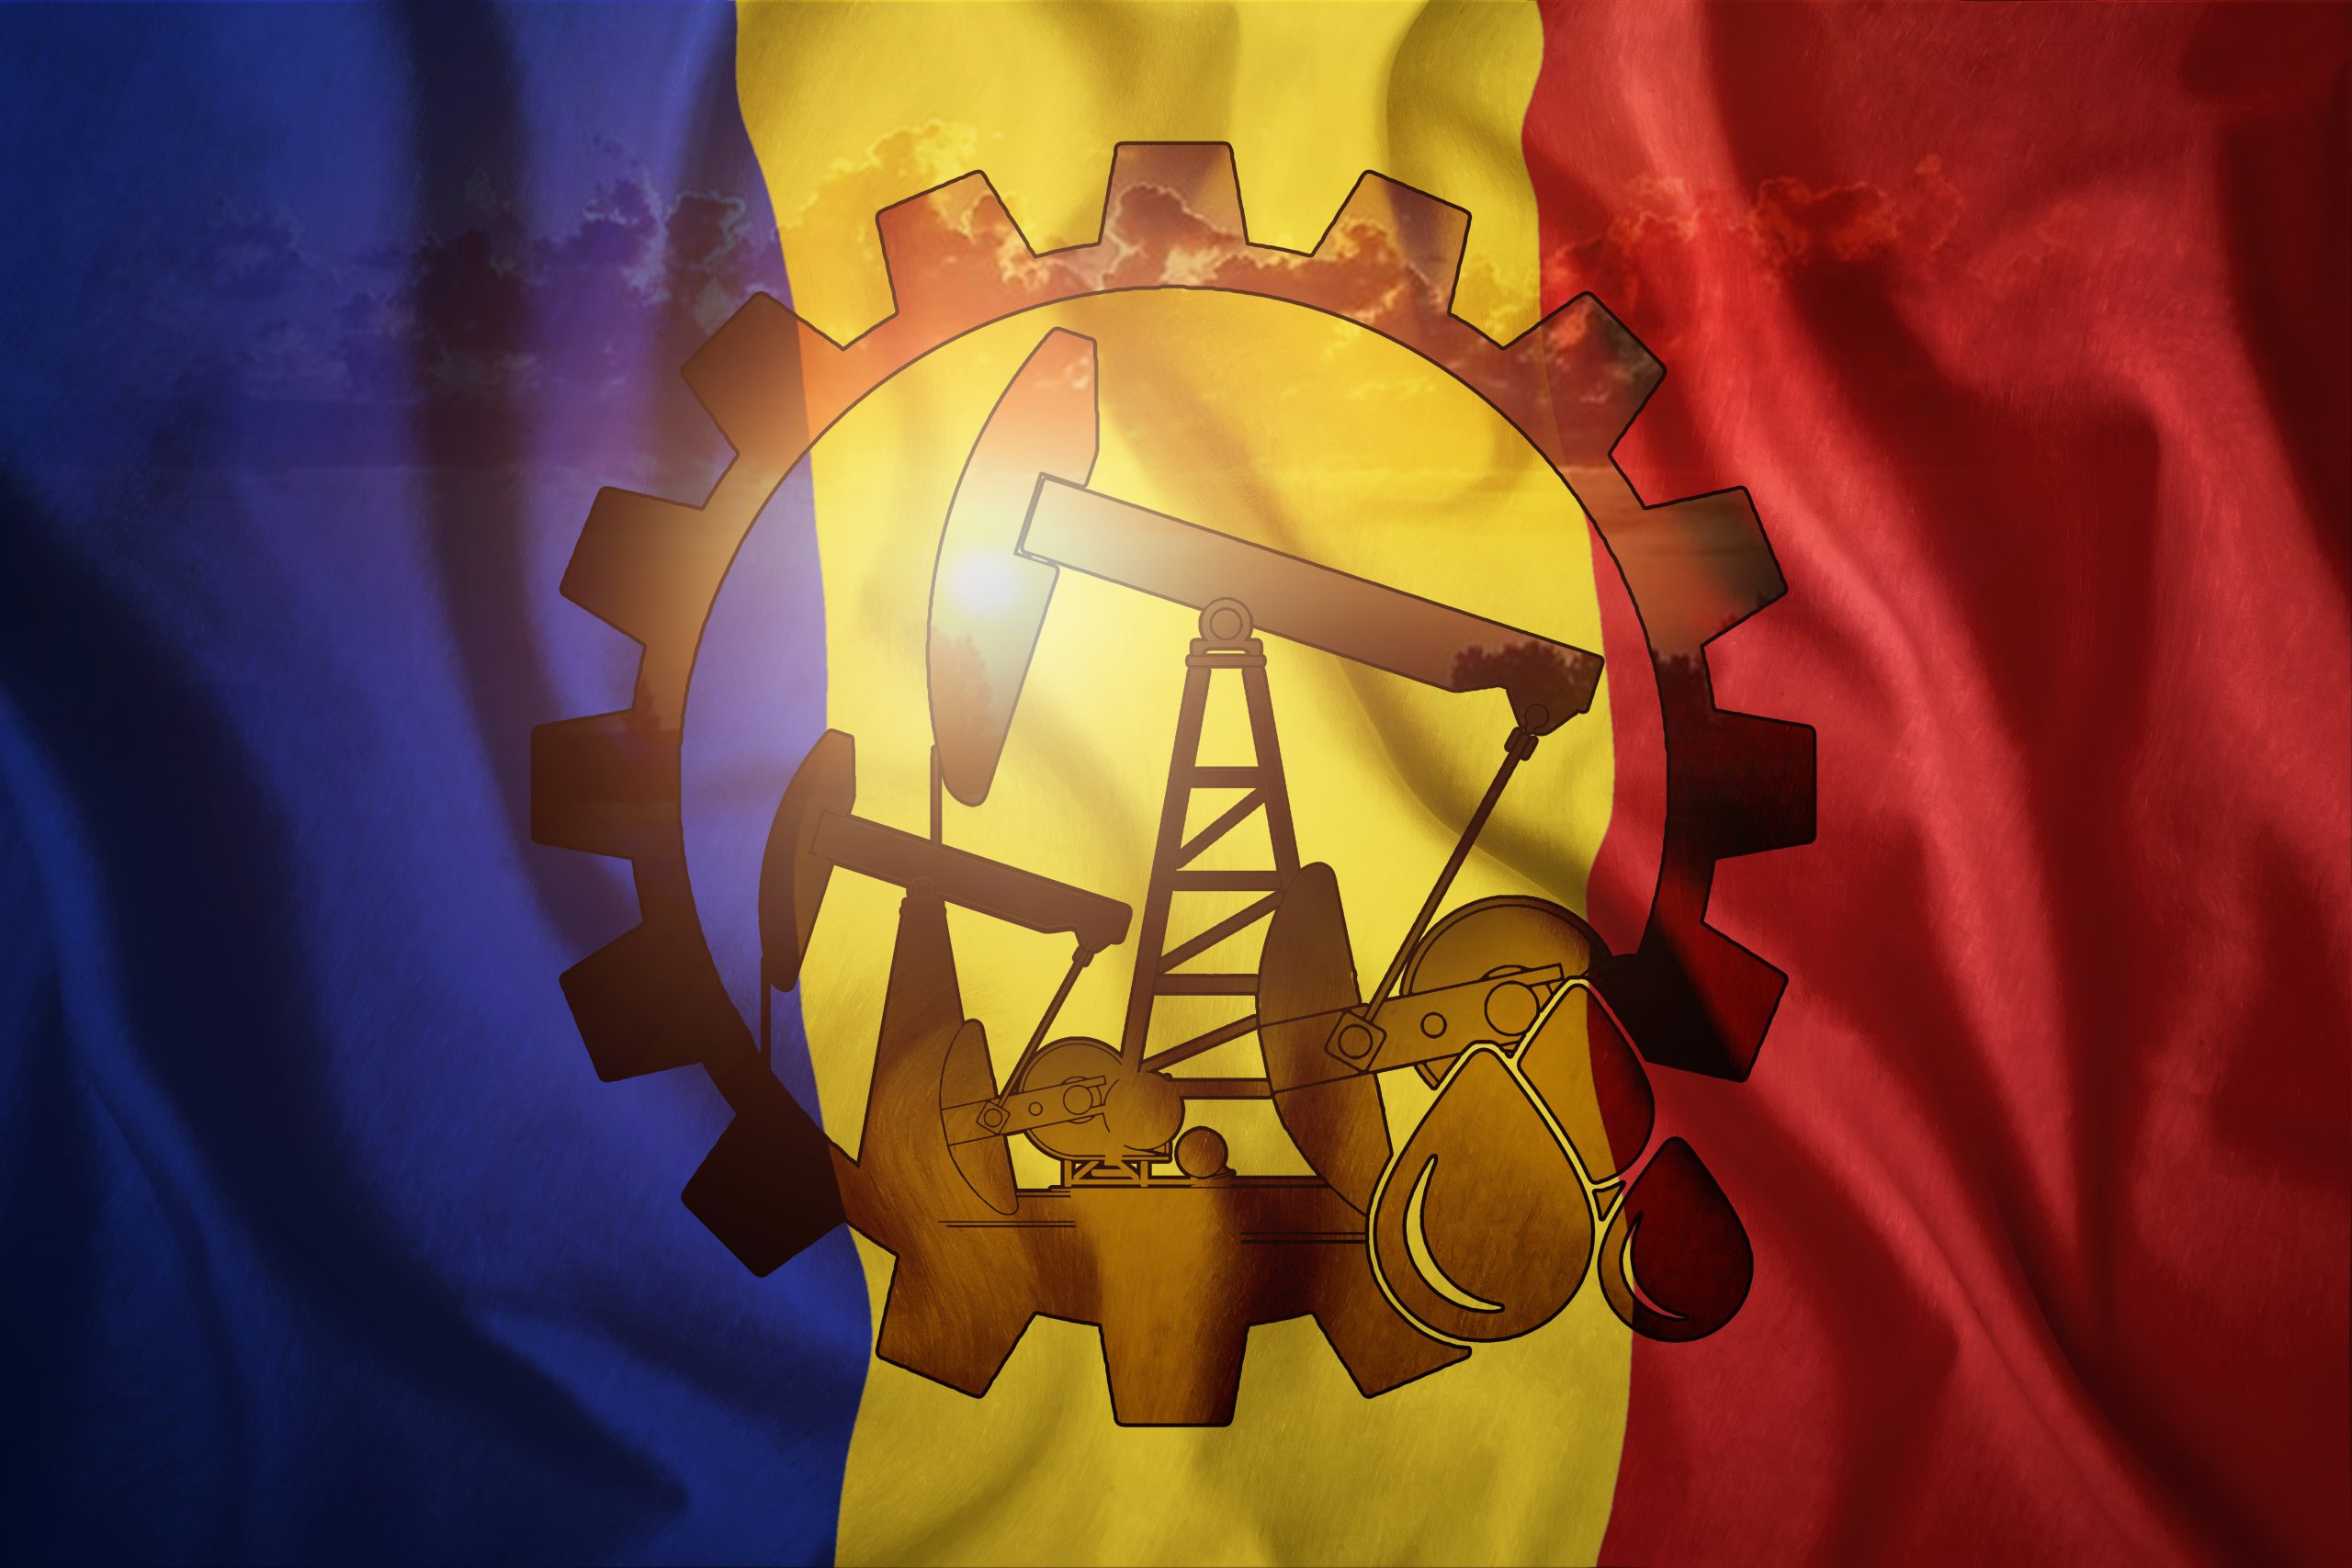 Oil rig against the background of the flag of Romania. Mixed environment. The concept of oil production, minerals, development of new deposits, well.